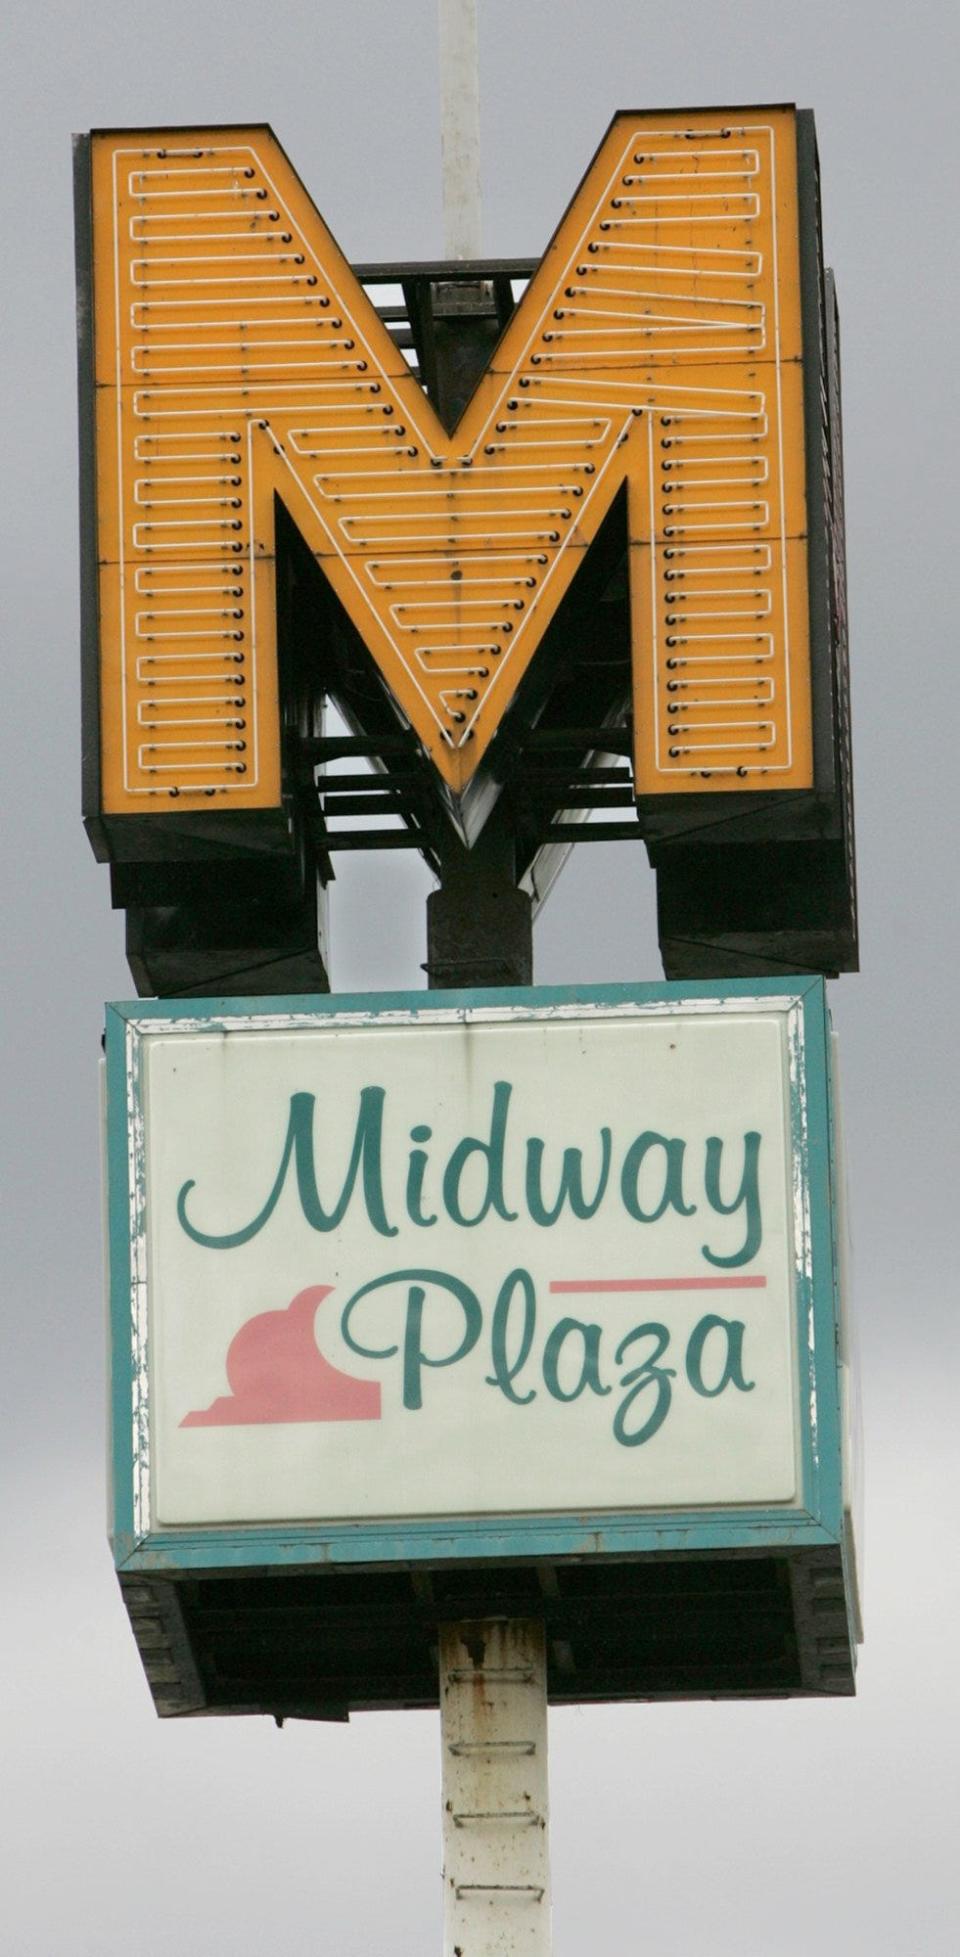 This well-known sign towers over Midway Plaza in 2011